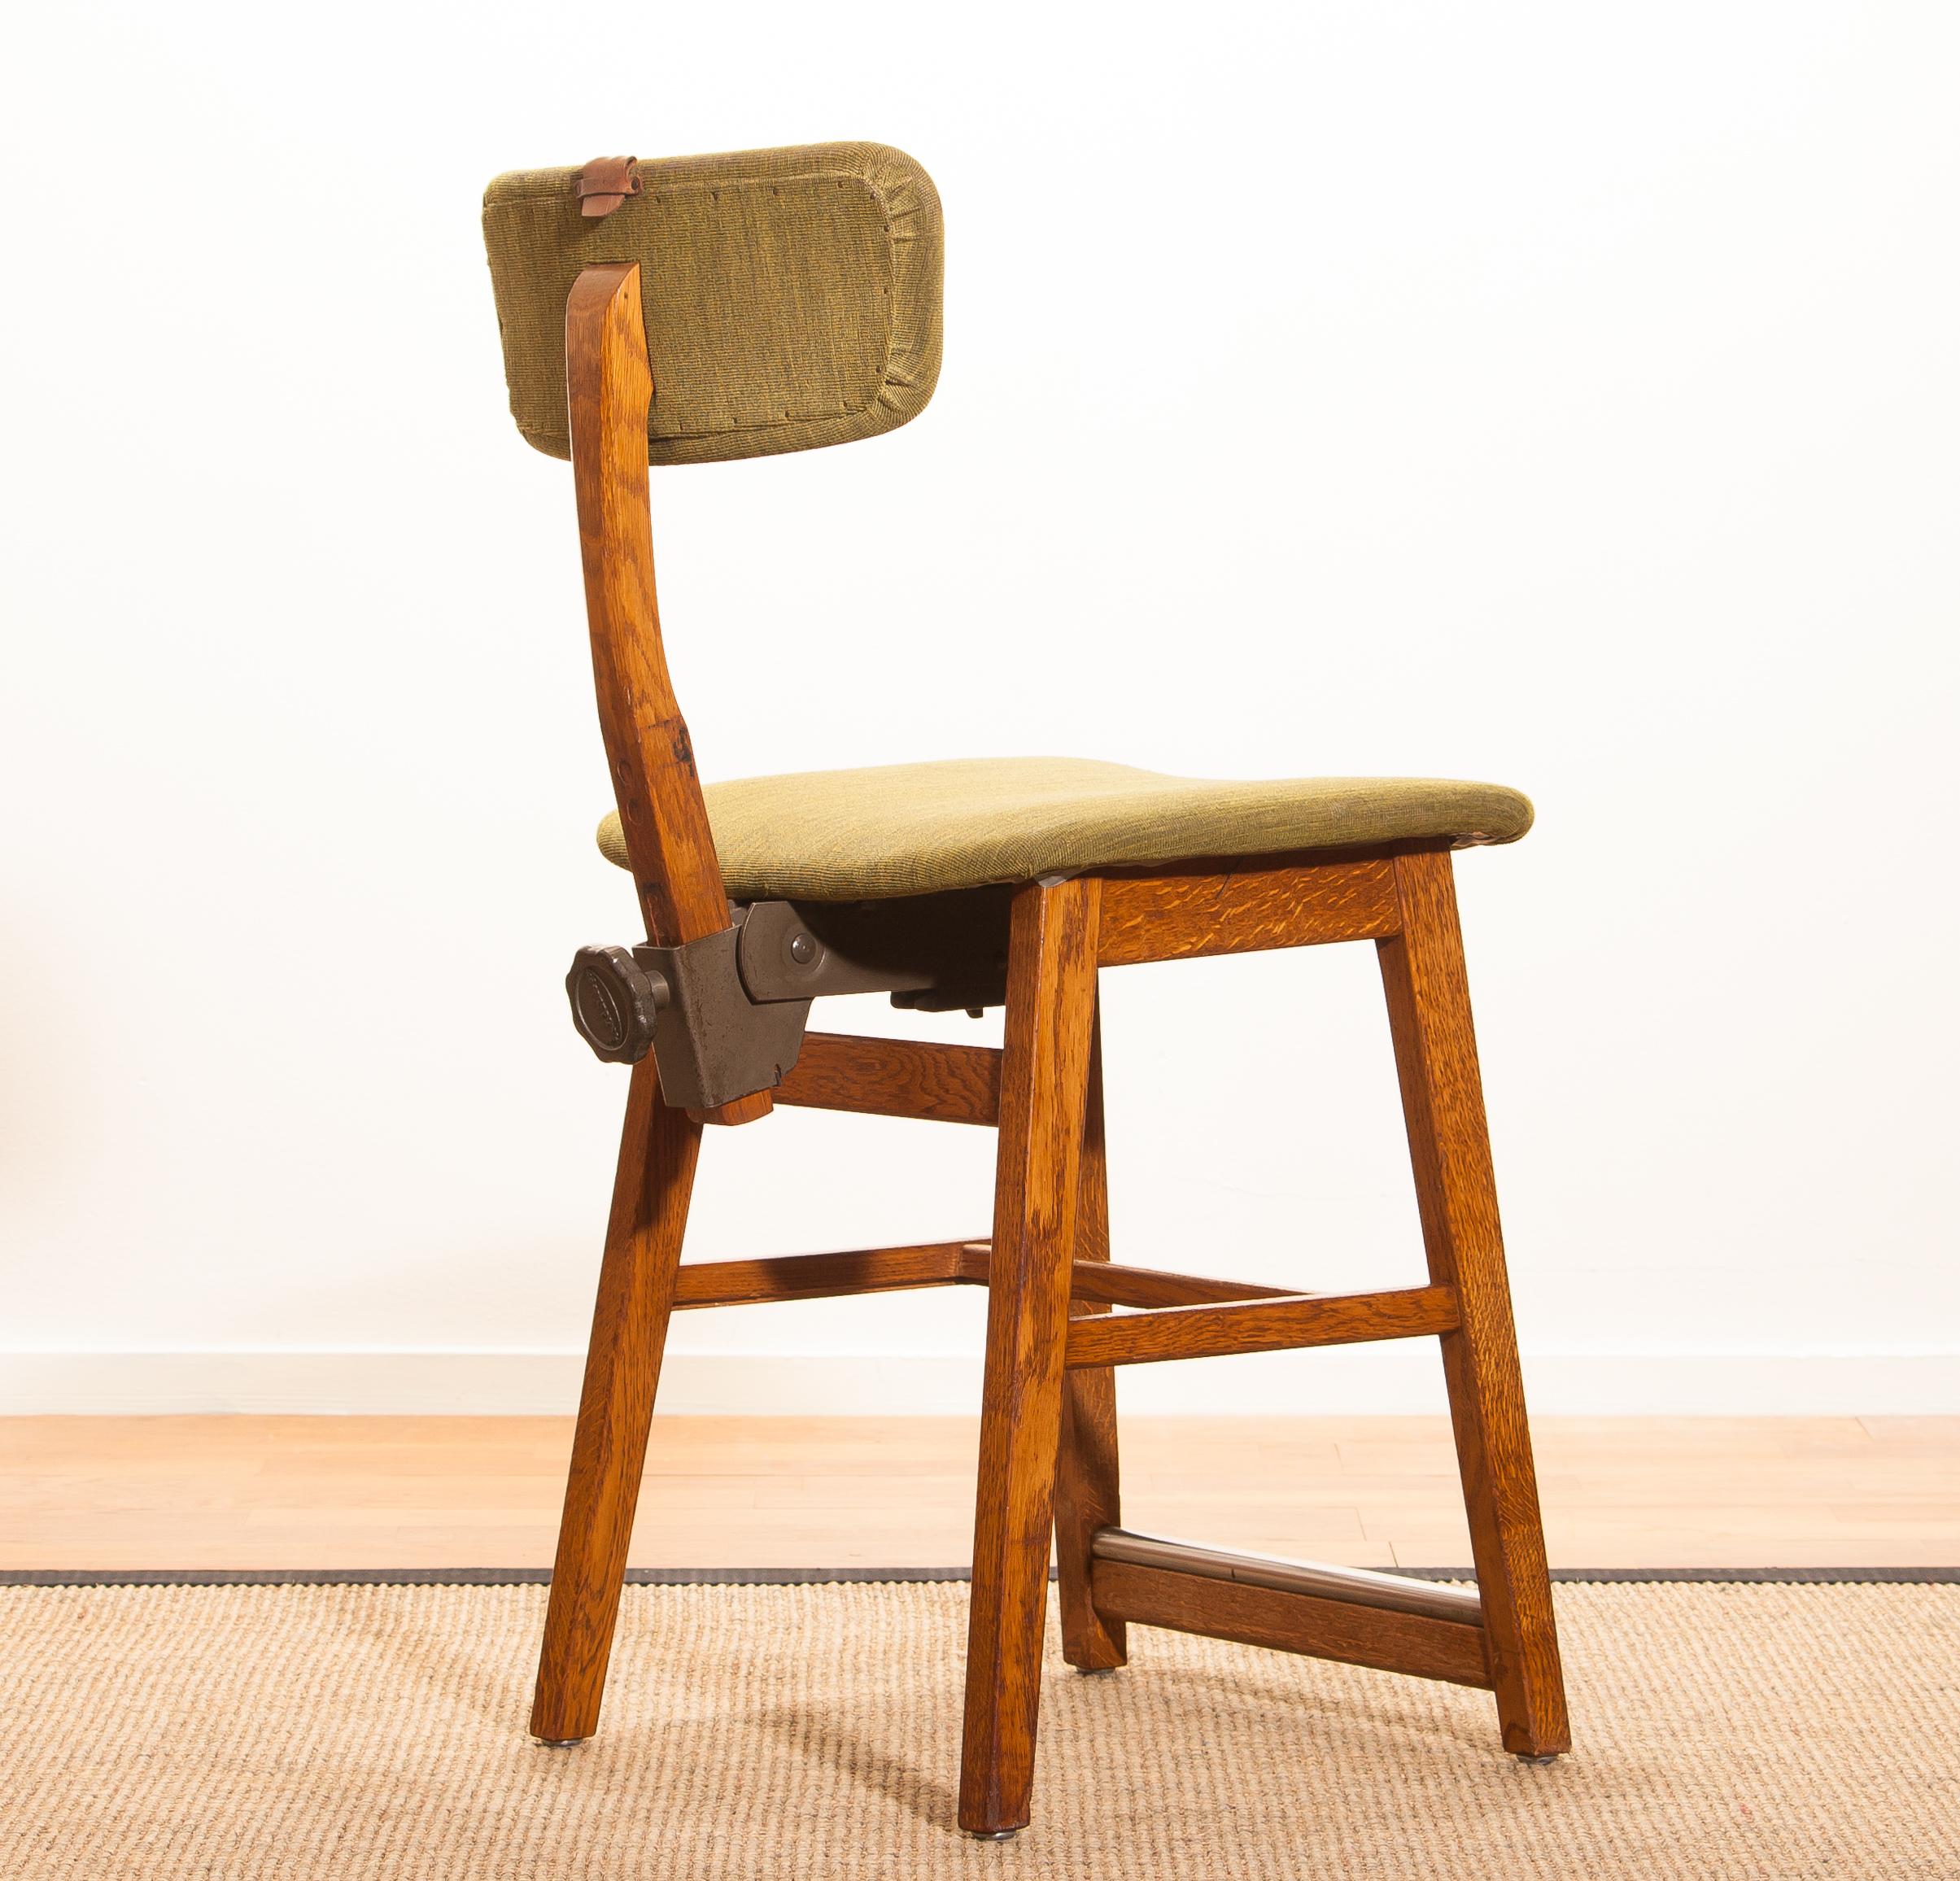 Industrial 1940s, Oak and Wool Desk Chair by Âtvidabergs, Sweden